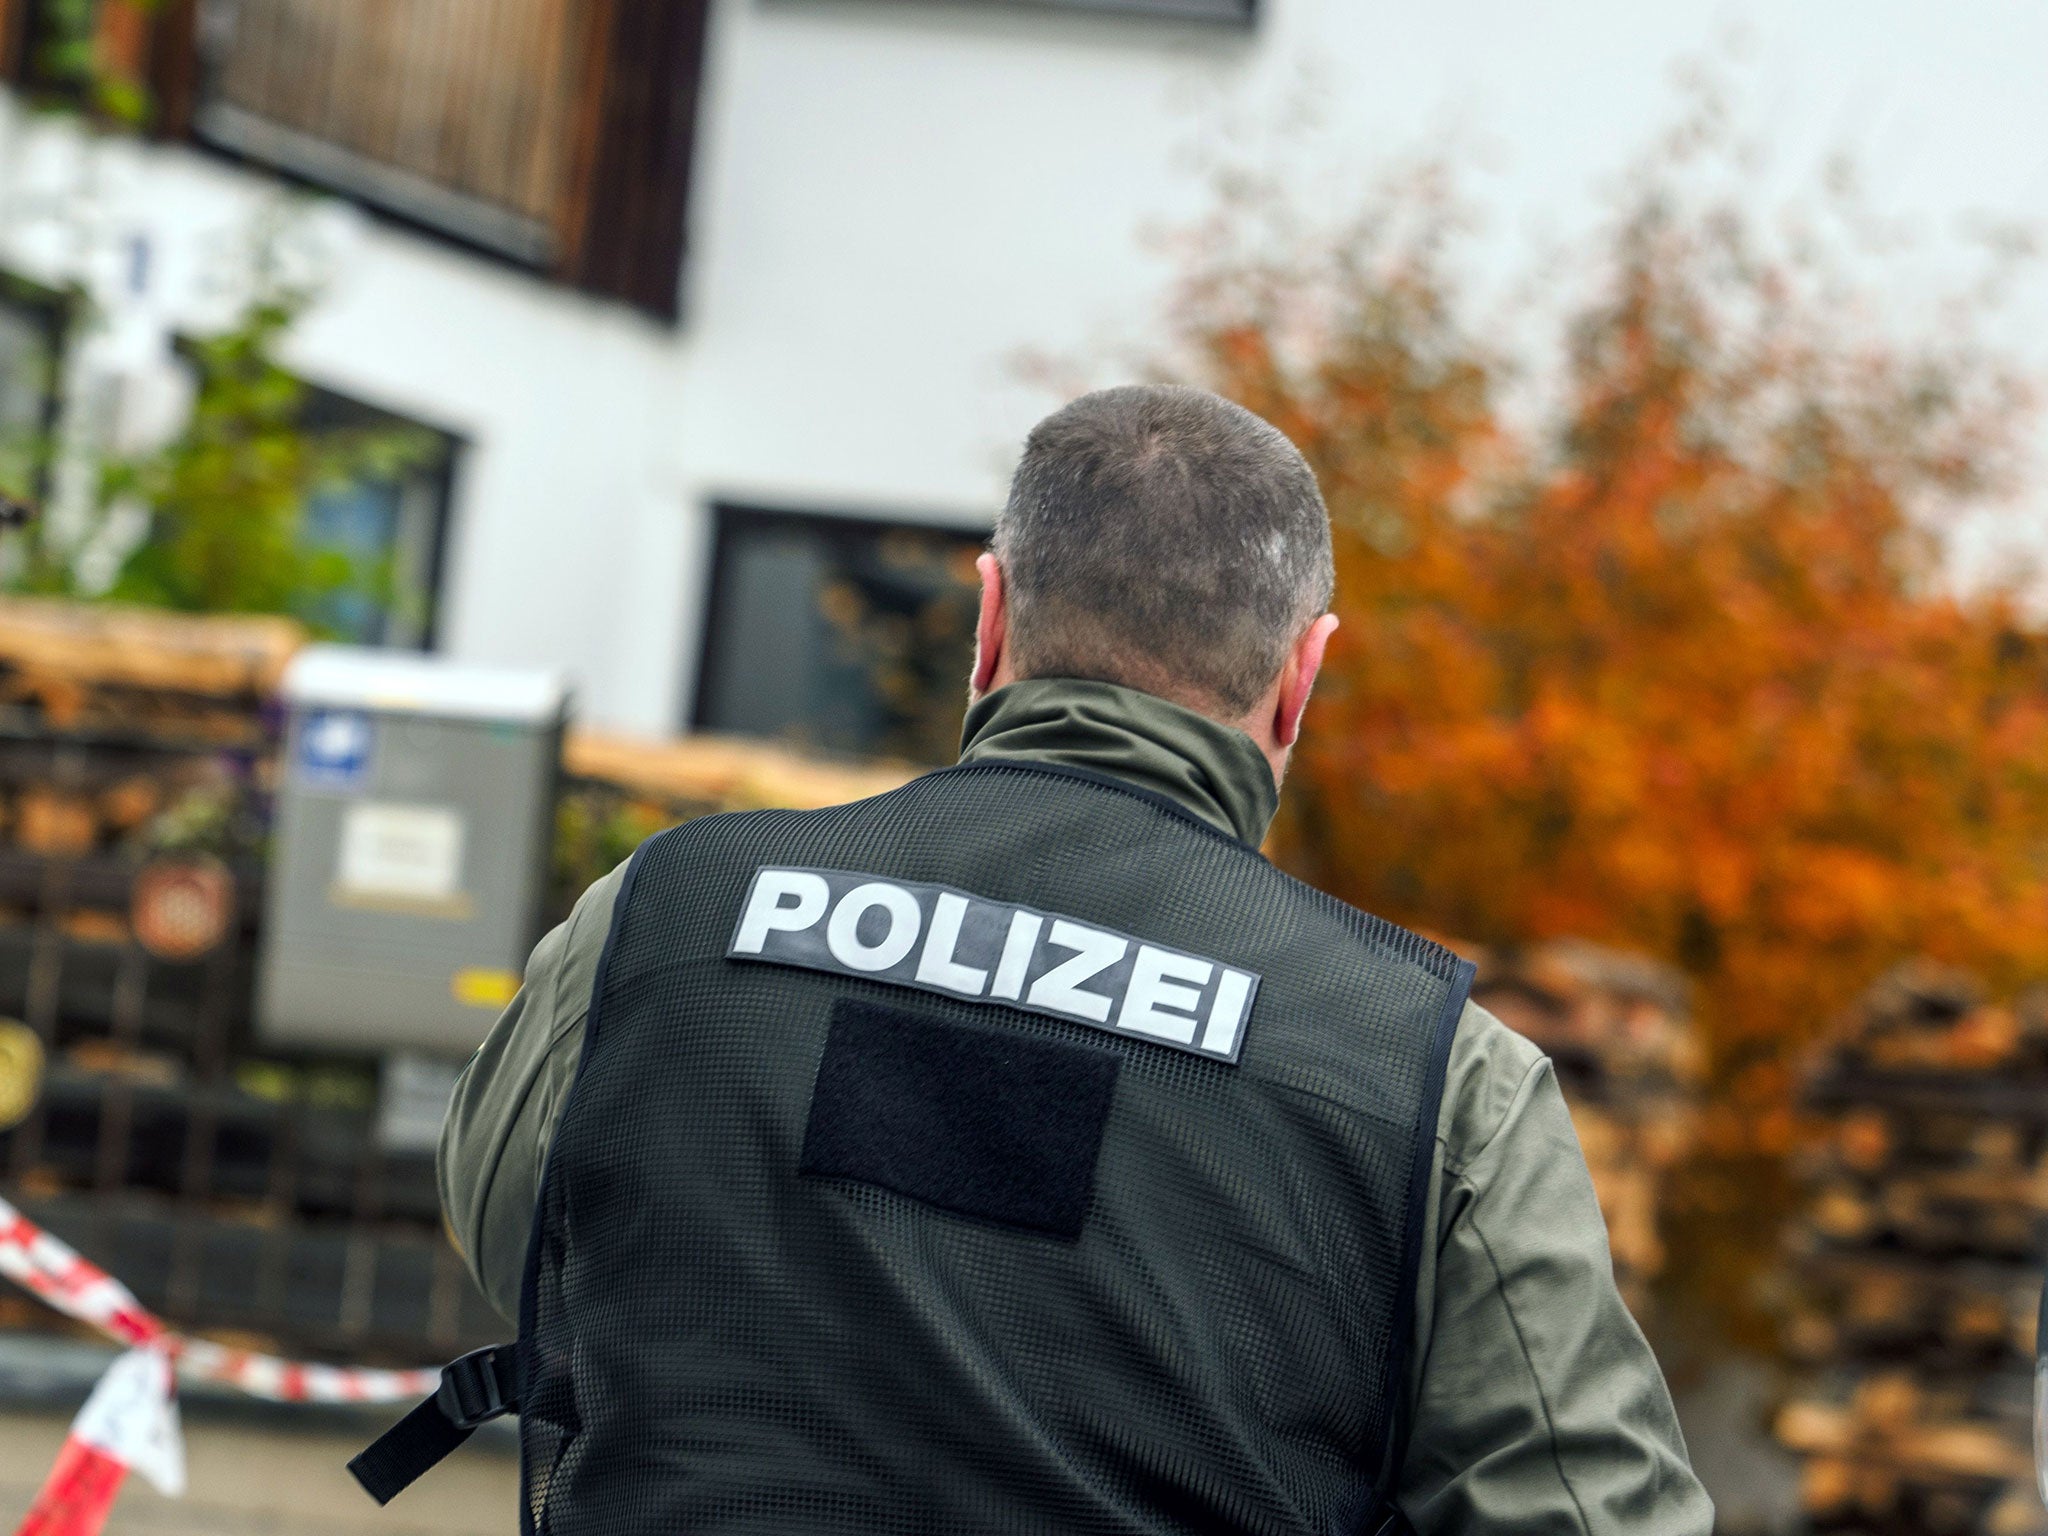 German police have issued warnings about vigilantes in several cities